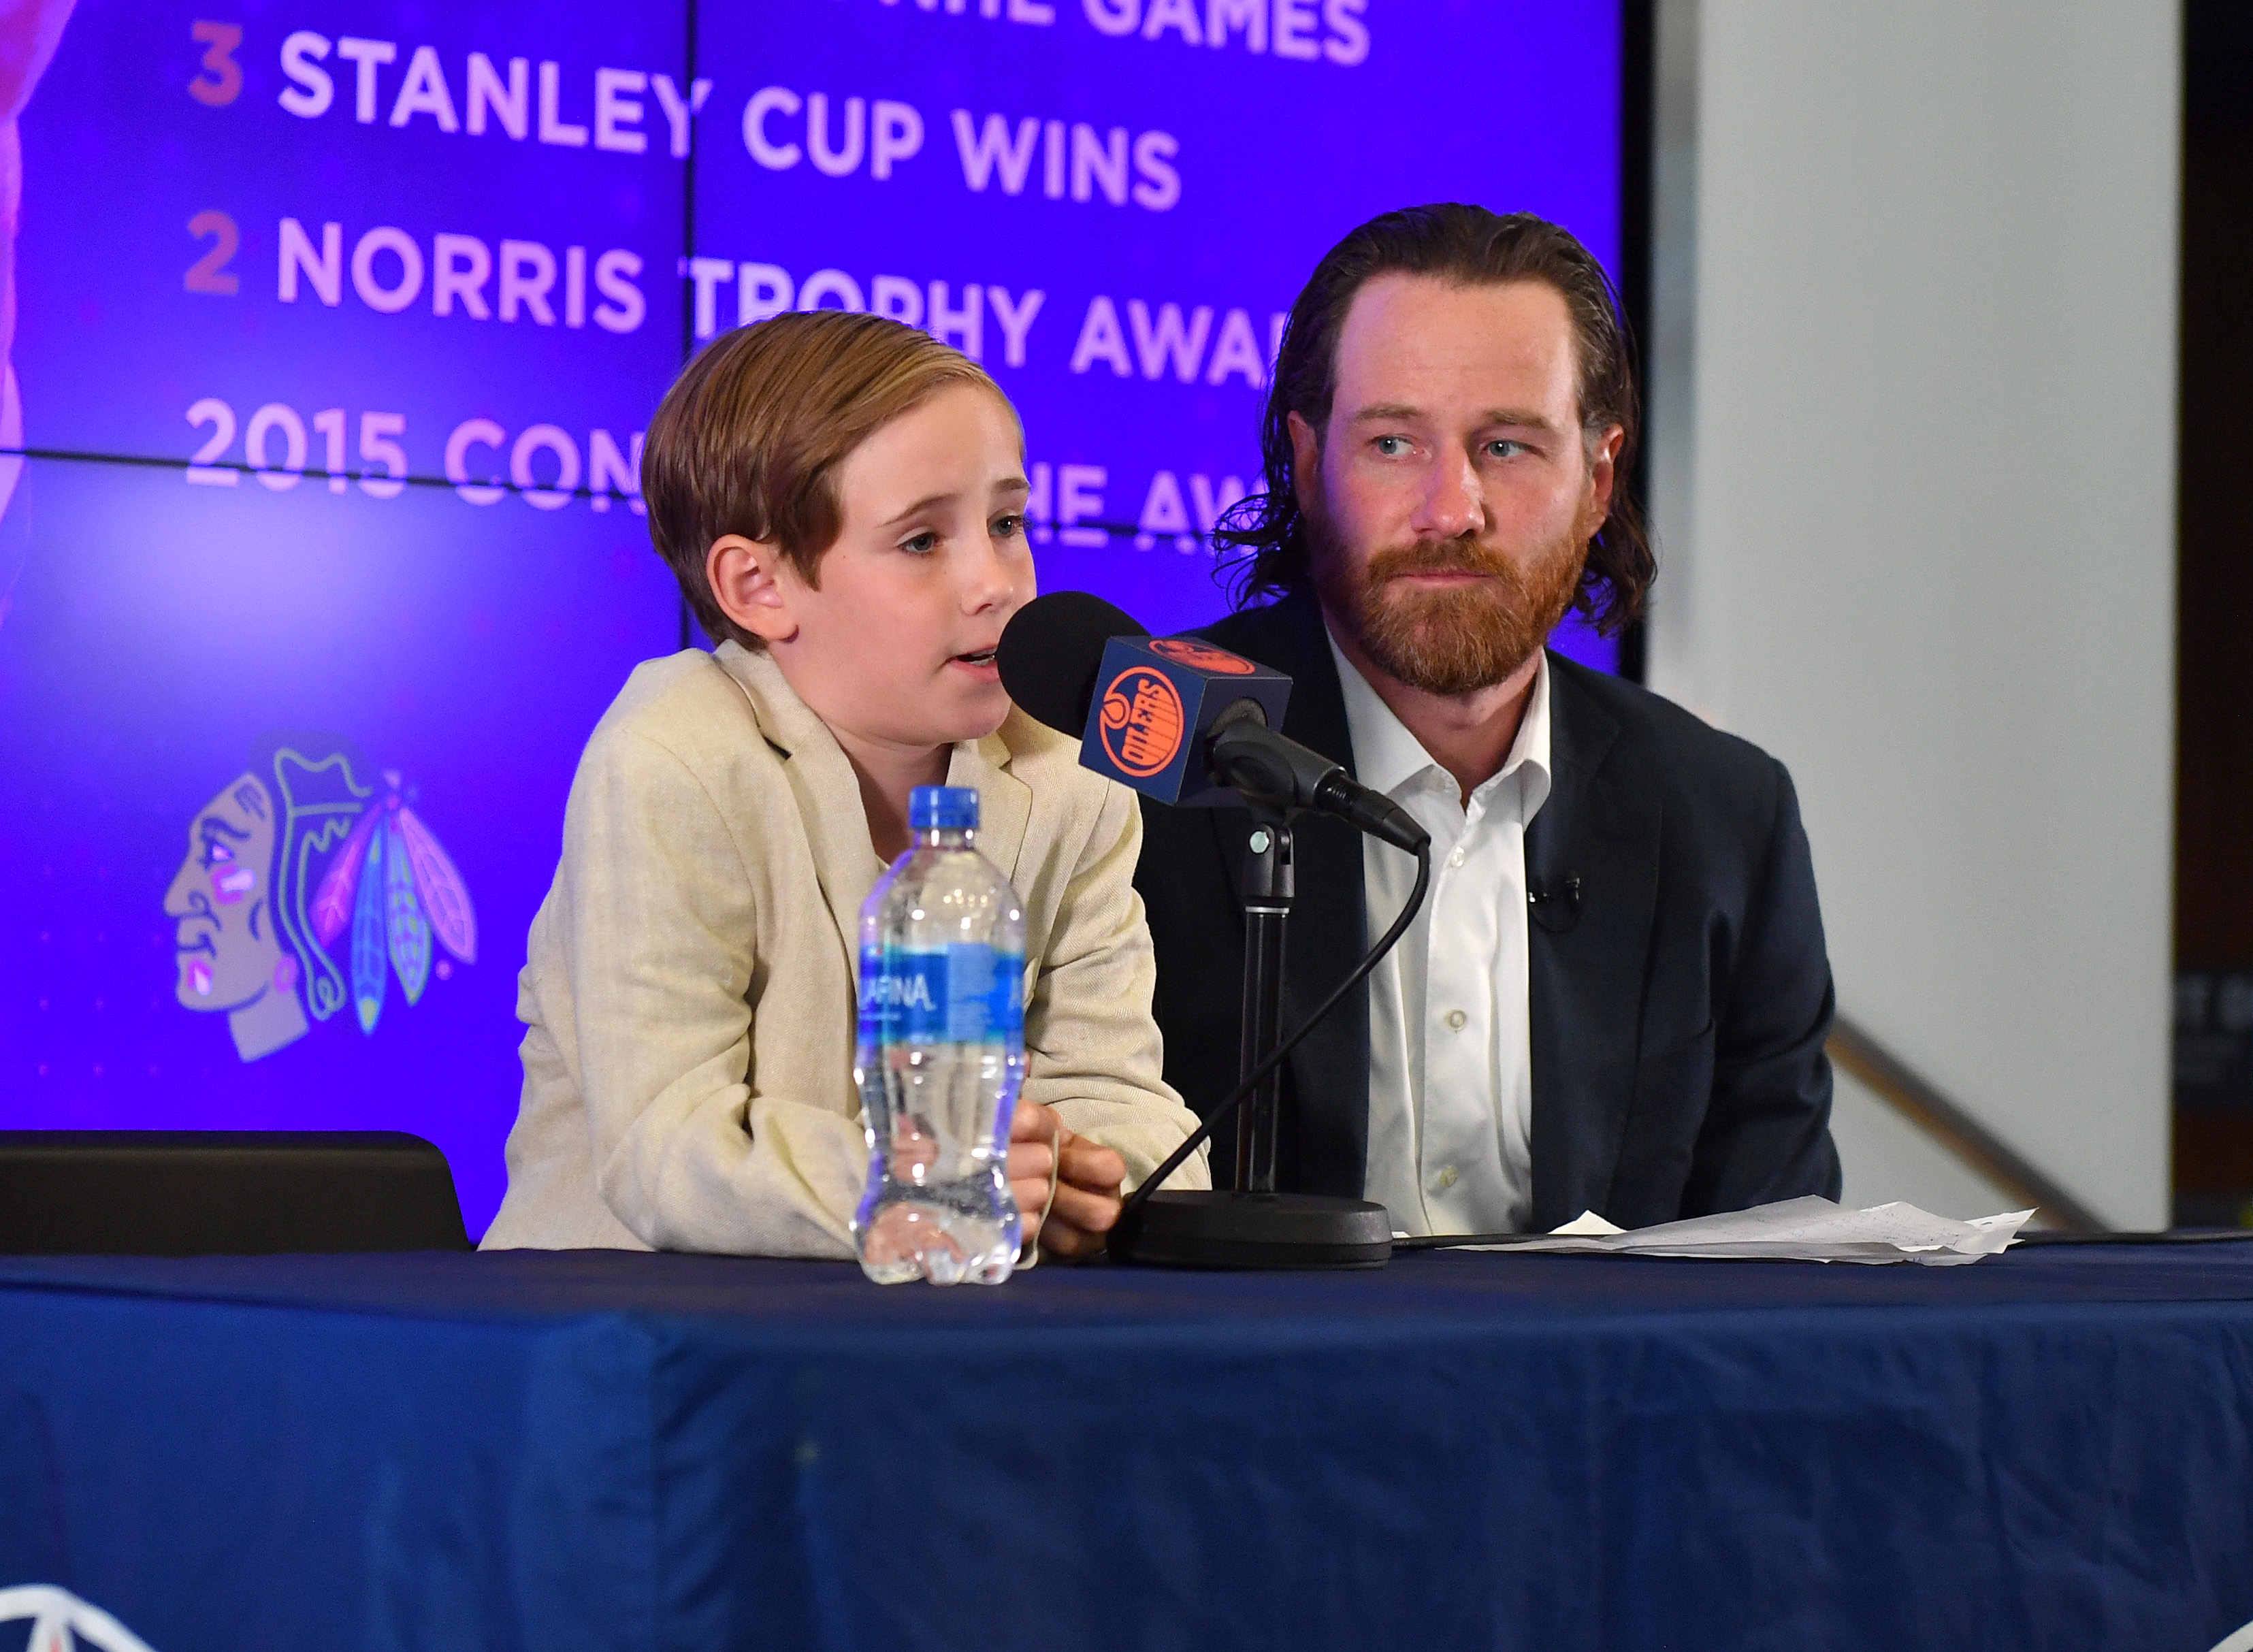 Duncan Keith Retirement Press Conference